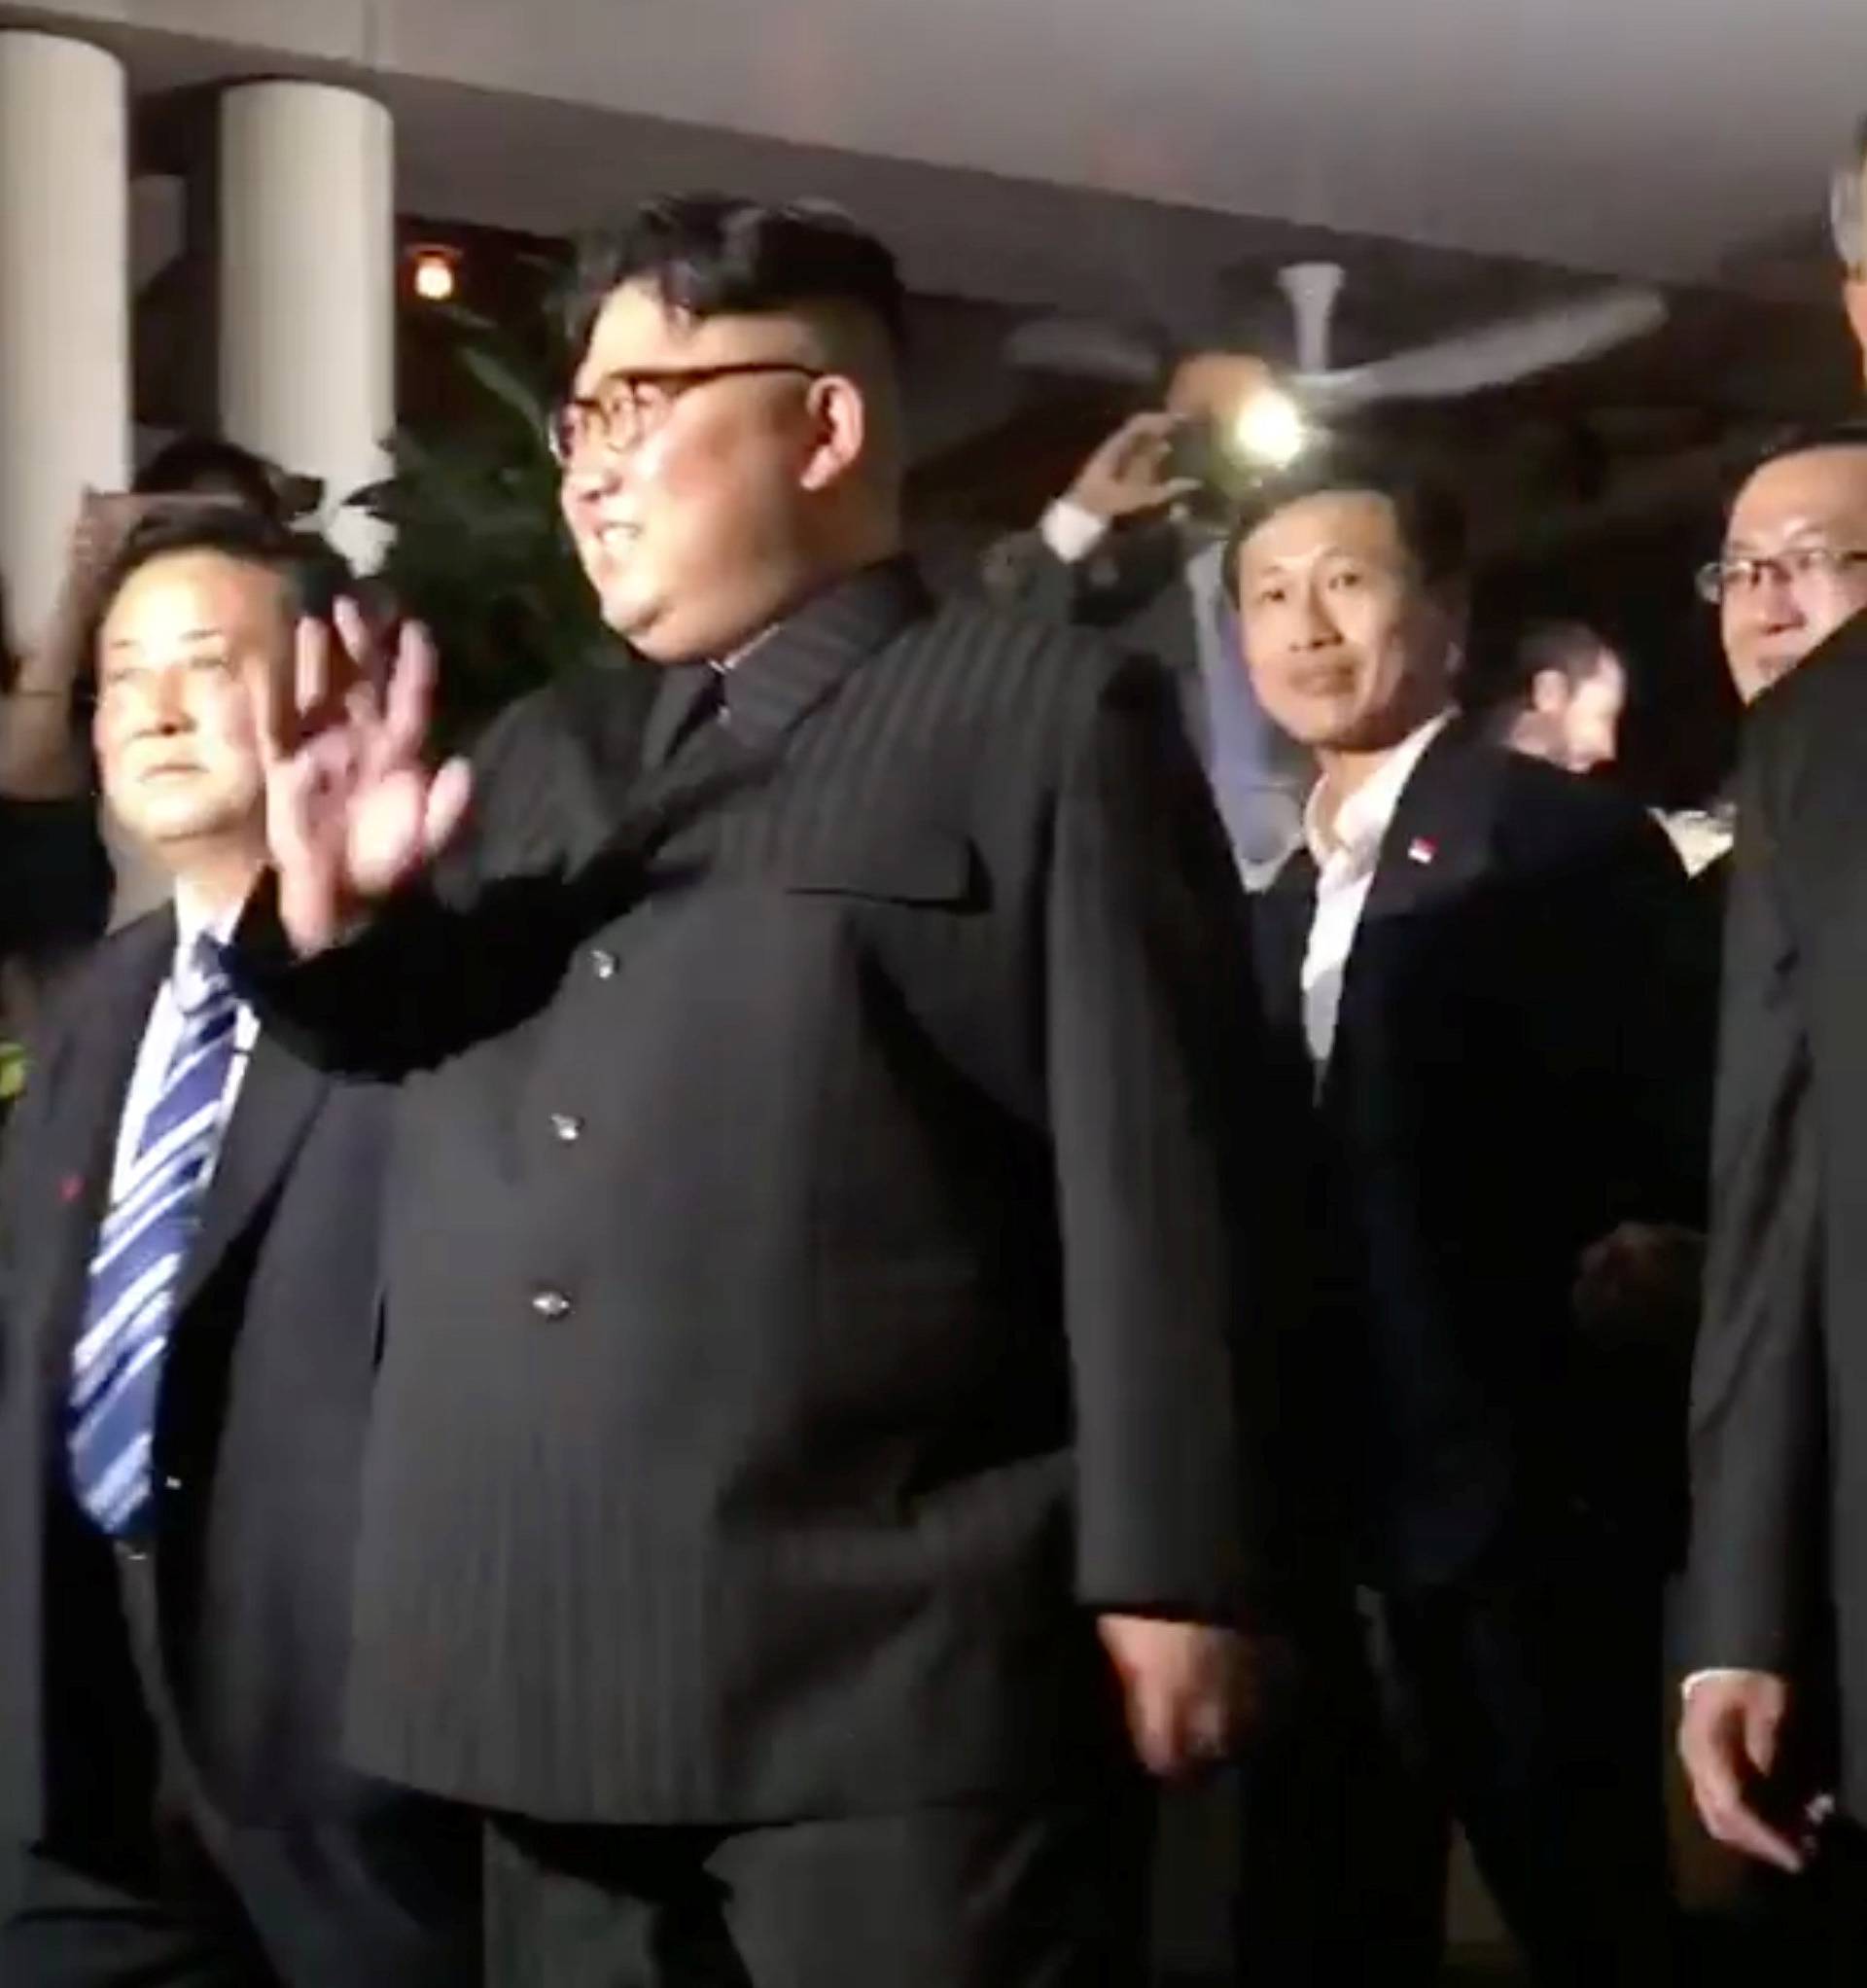 North Korea's leader Kim Jong Un waves to the crowd in Singapore